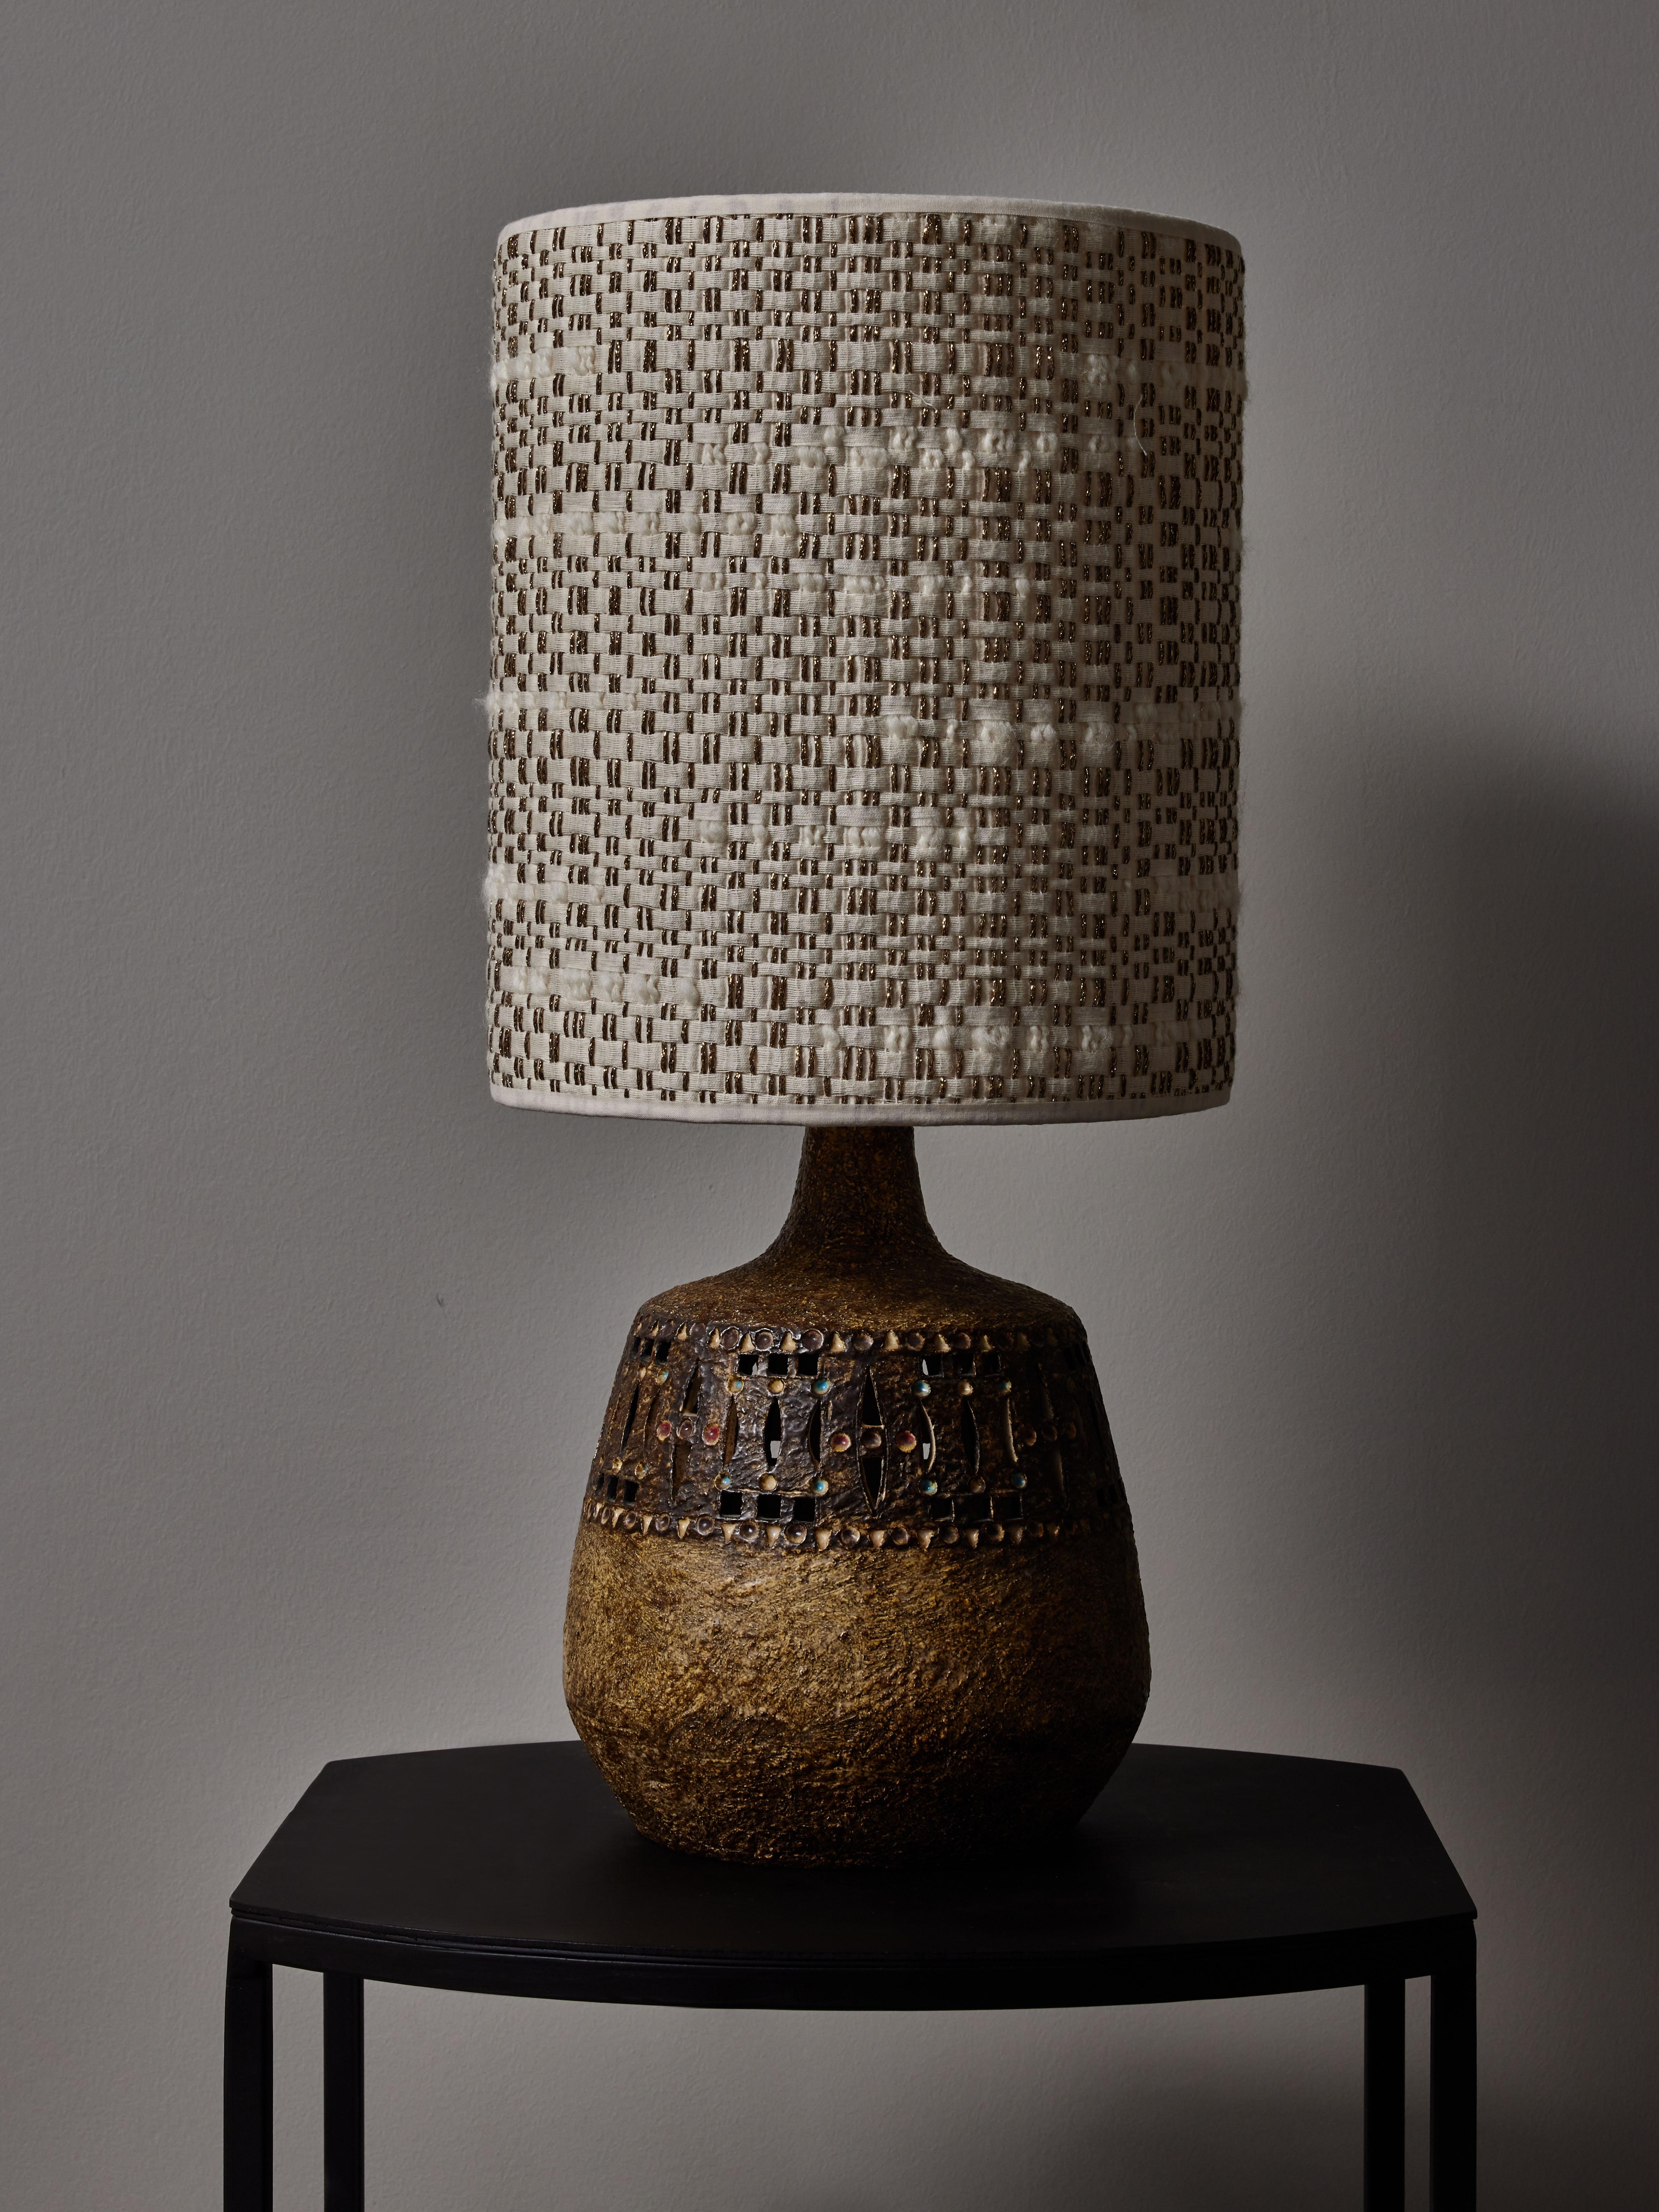 Vintage ceramic table lamp in earth tones with small dots of colours by Raphael Giarrusso in the 1960s. Topped with a new lampshade with Dedar Milano fabric.

Raphaël Giarrusso (1925-1986)
Canadian painter, sculptor and ceramist who established